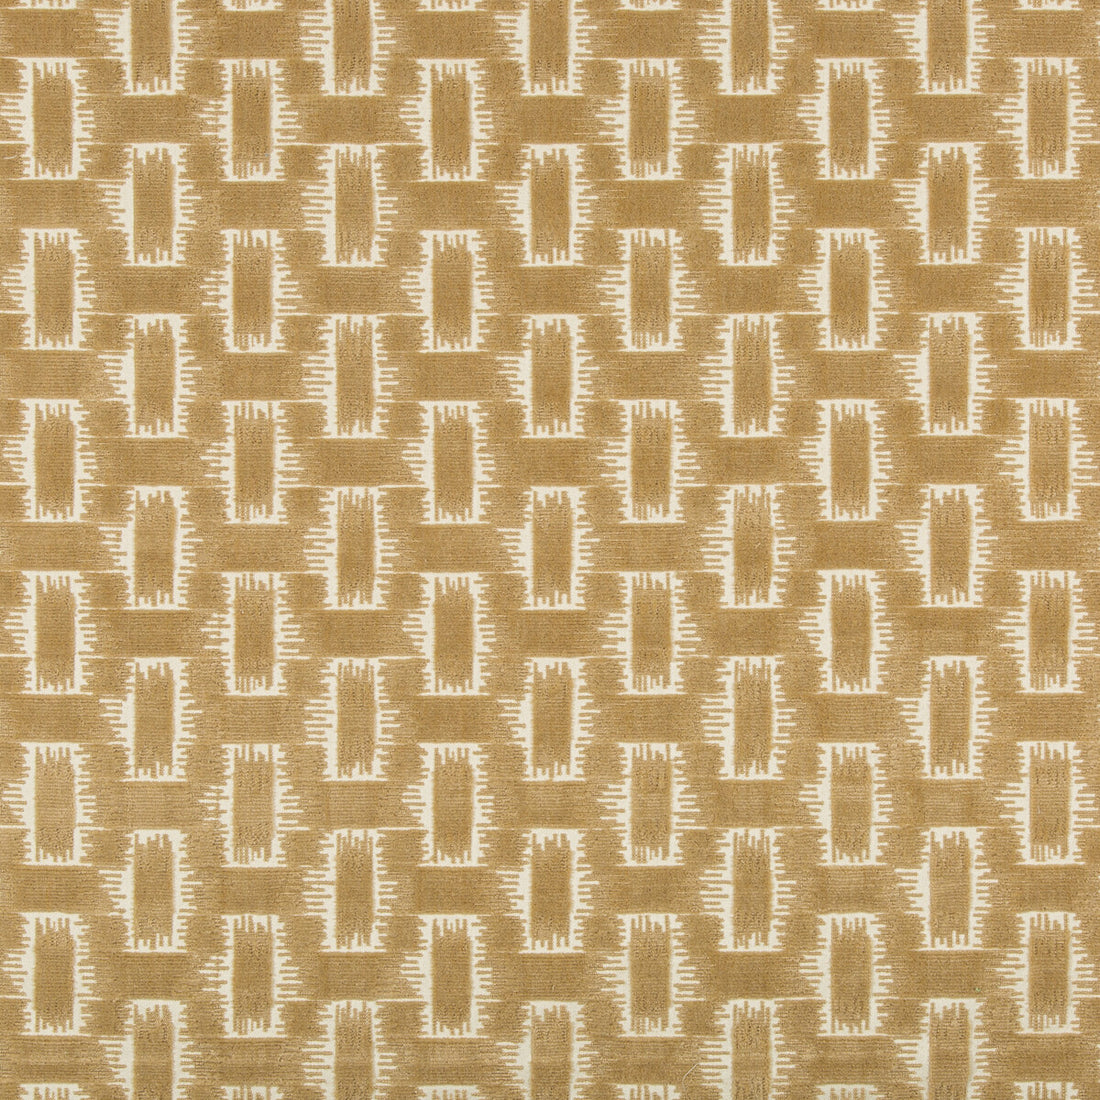 Chambord Velvet fabric in sand color - pattern 8020116.116.0 - by Brunschwig &amp; Fils in the Chaumont Velvets collection